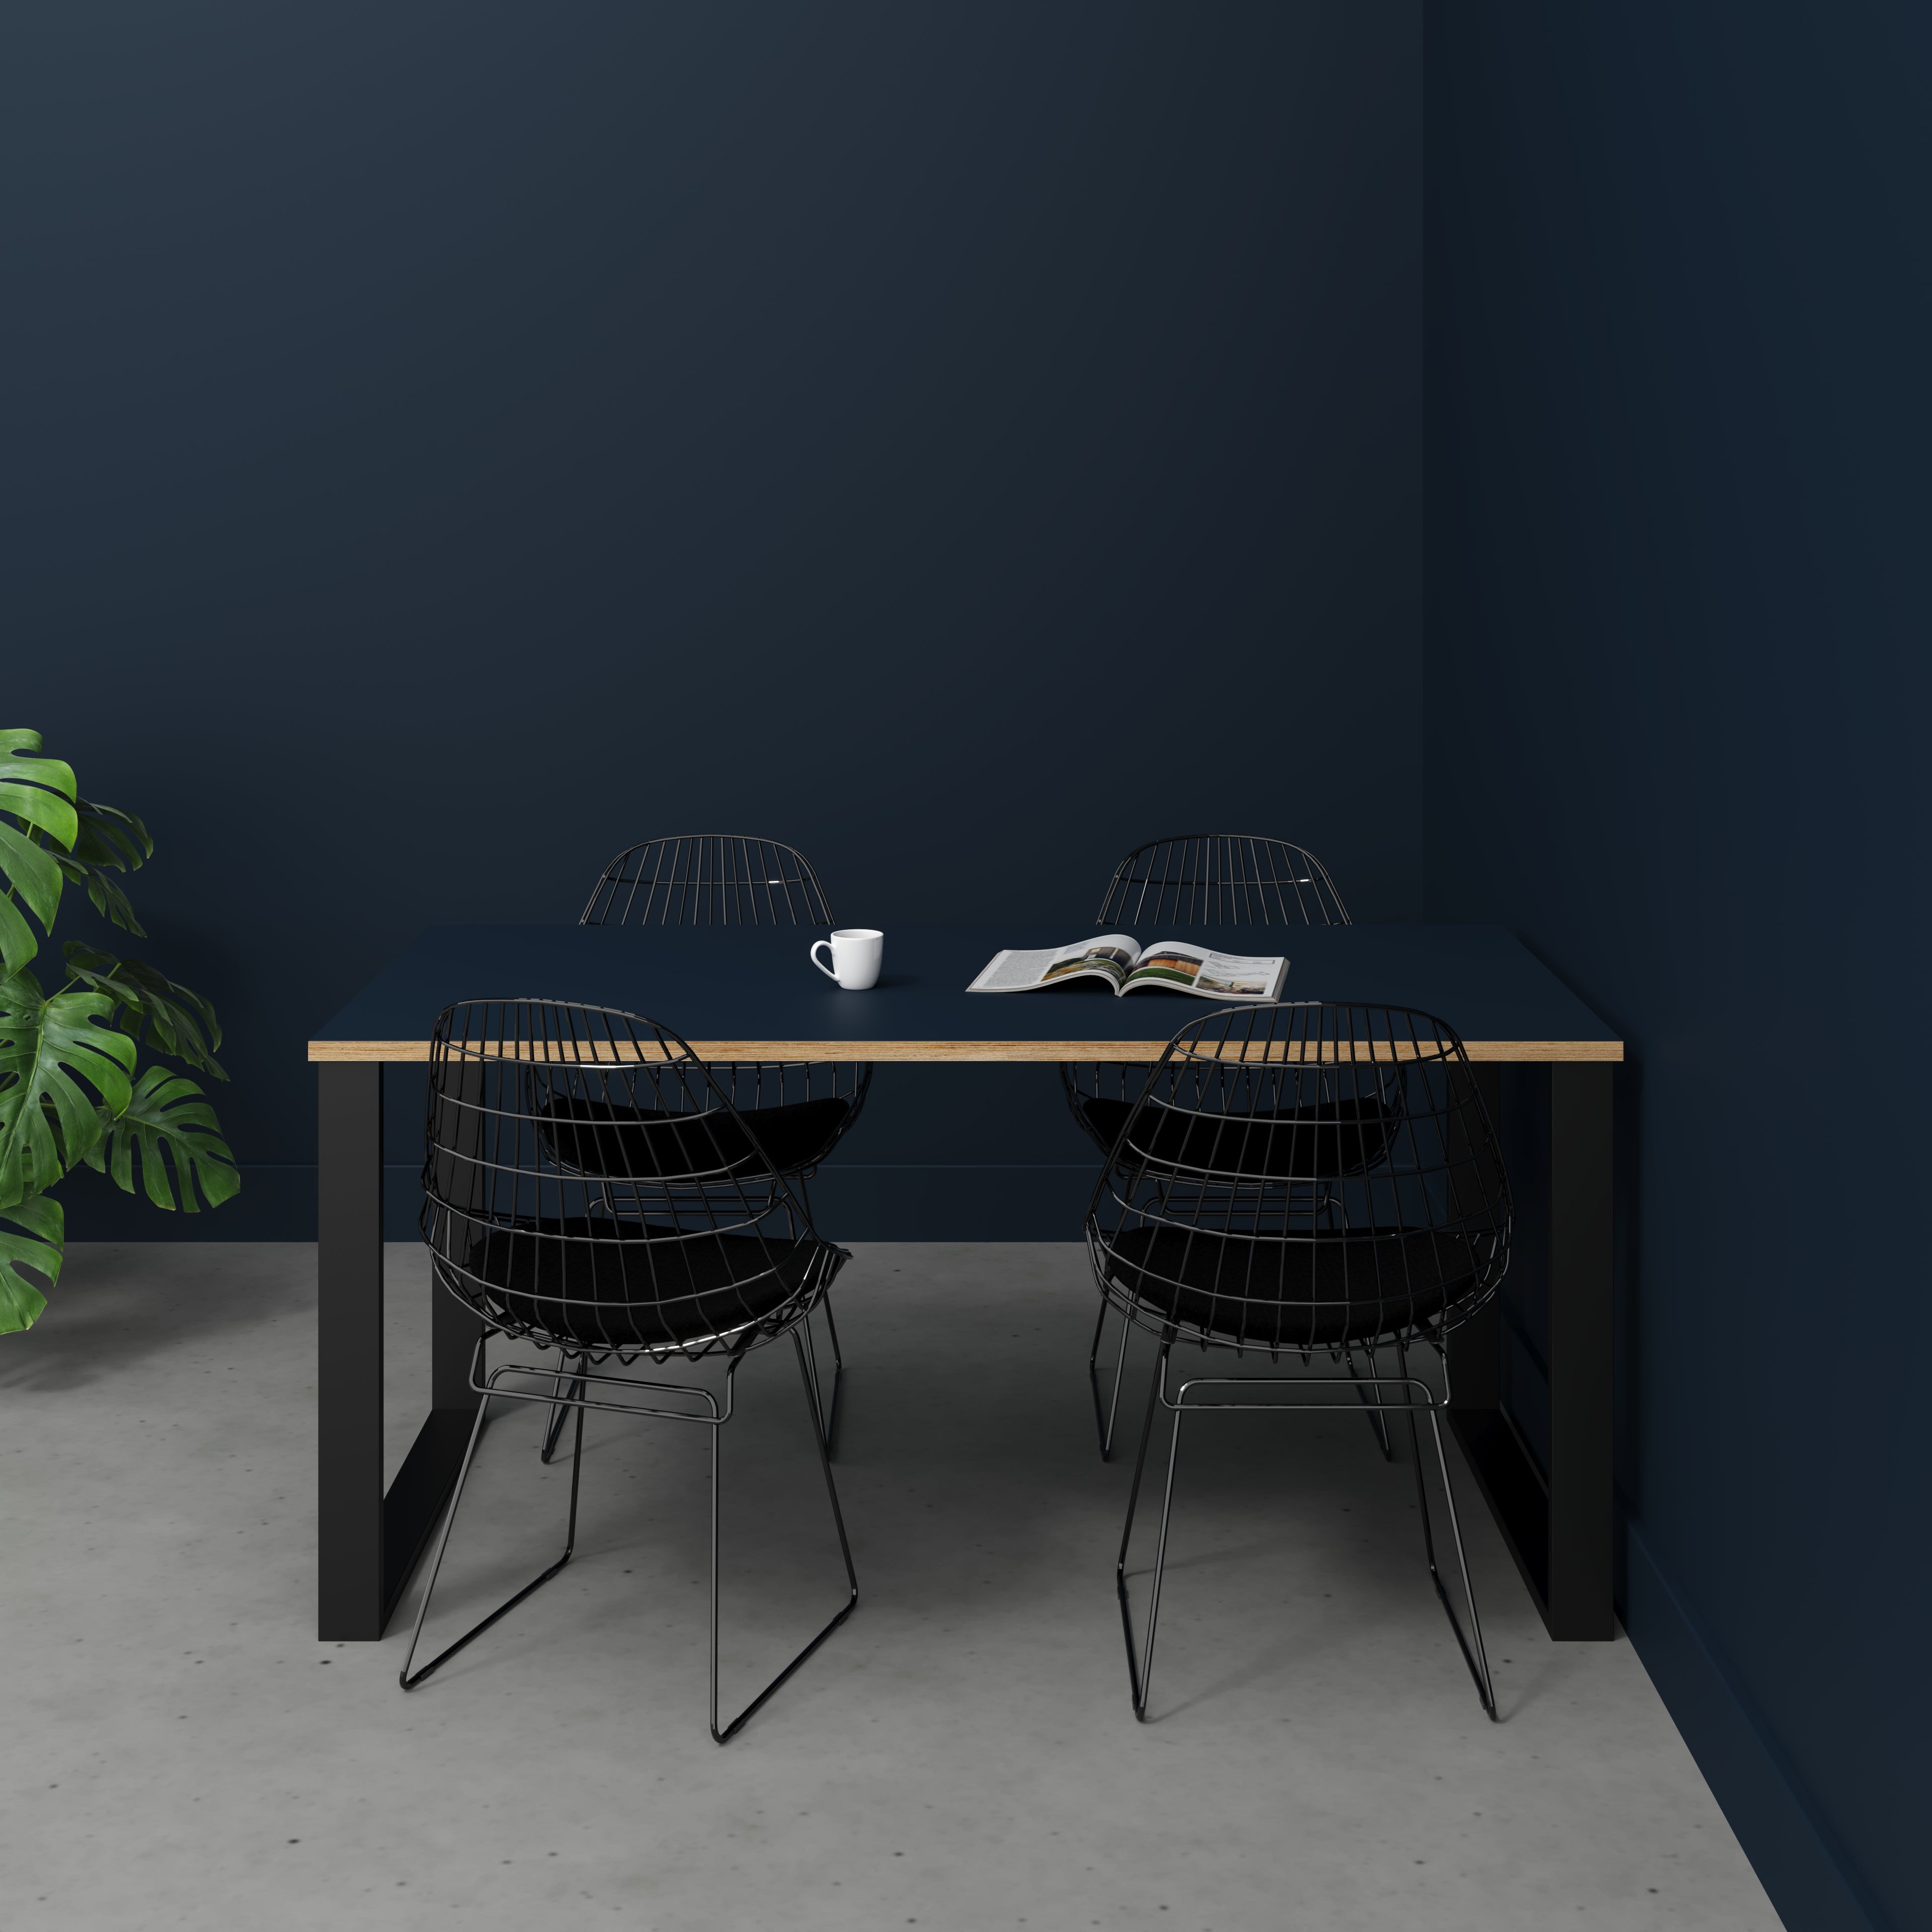 Table with Black Industrial Legs - Formica Night Sea Blue - 1600(w) x 800(d)